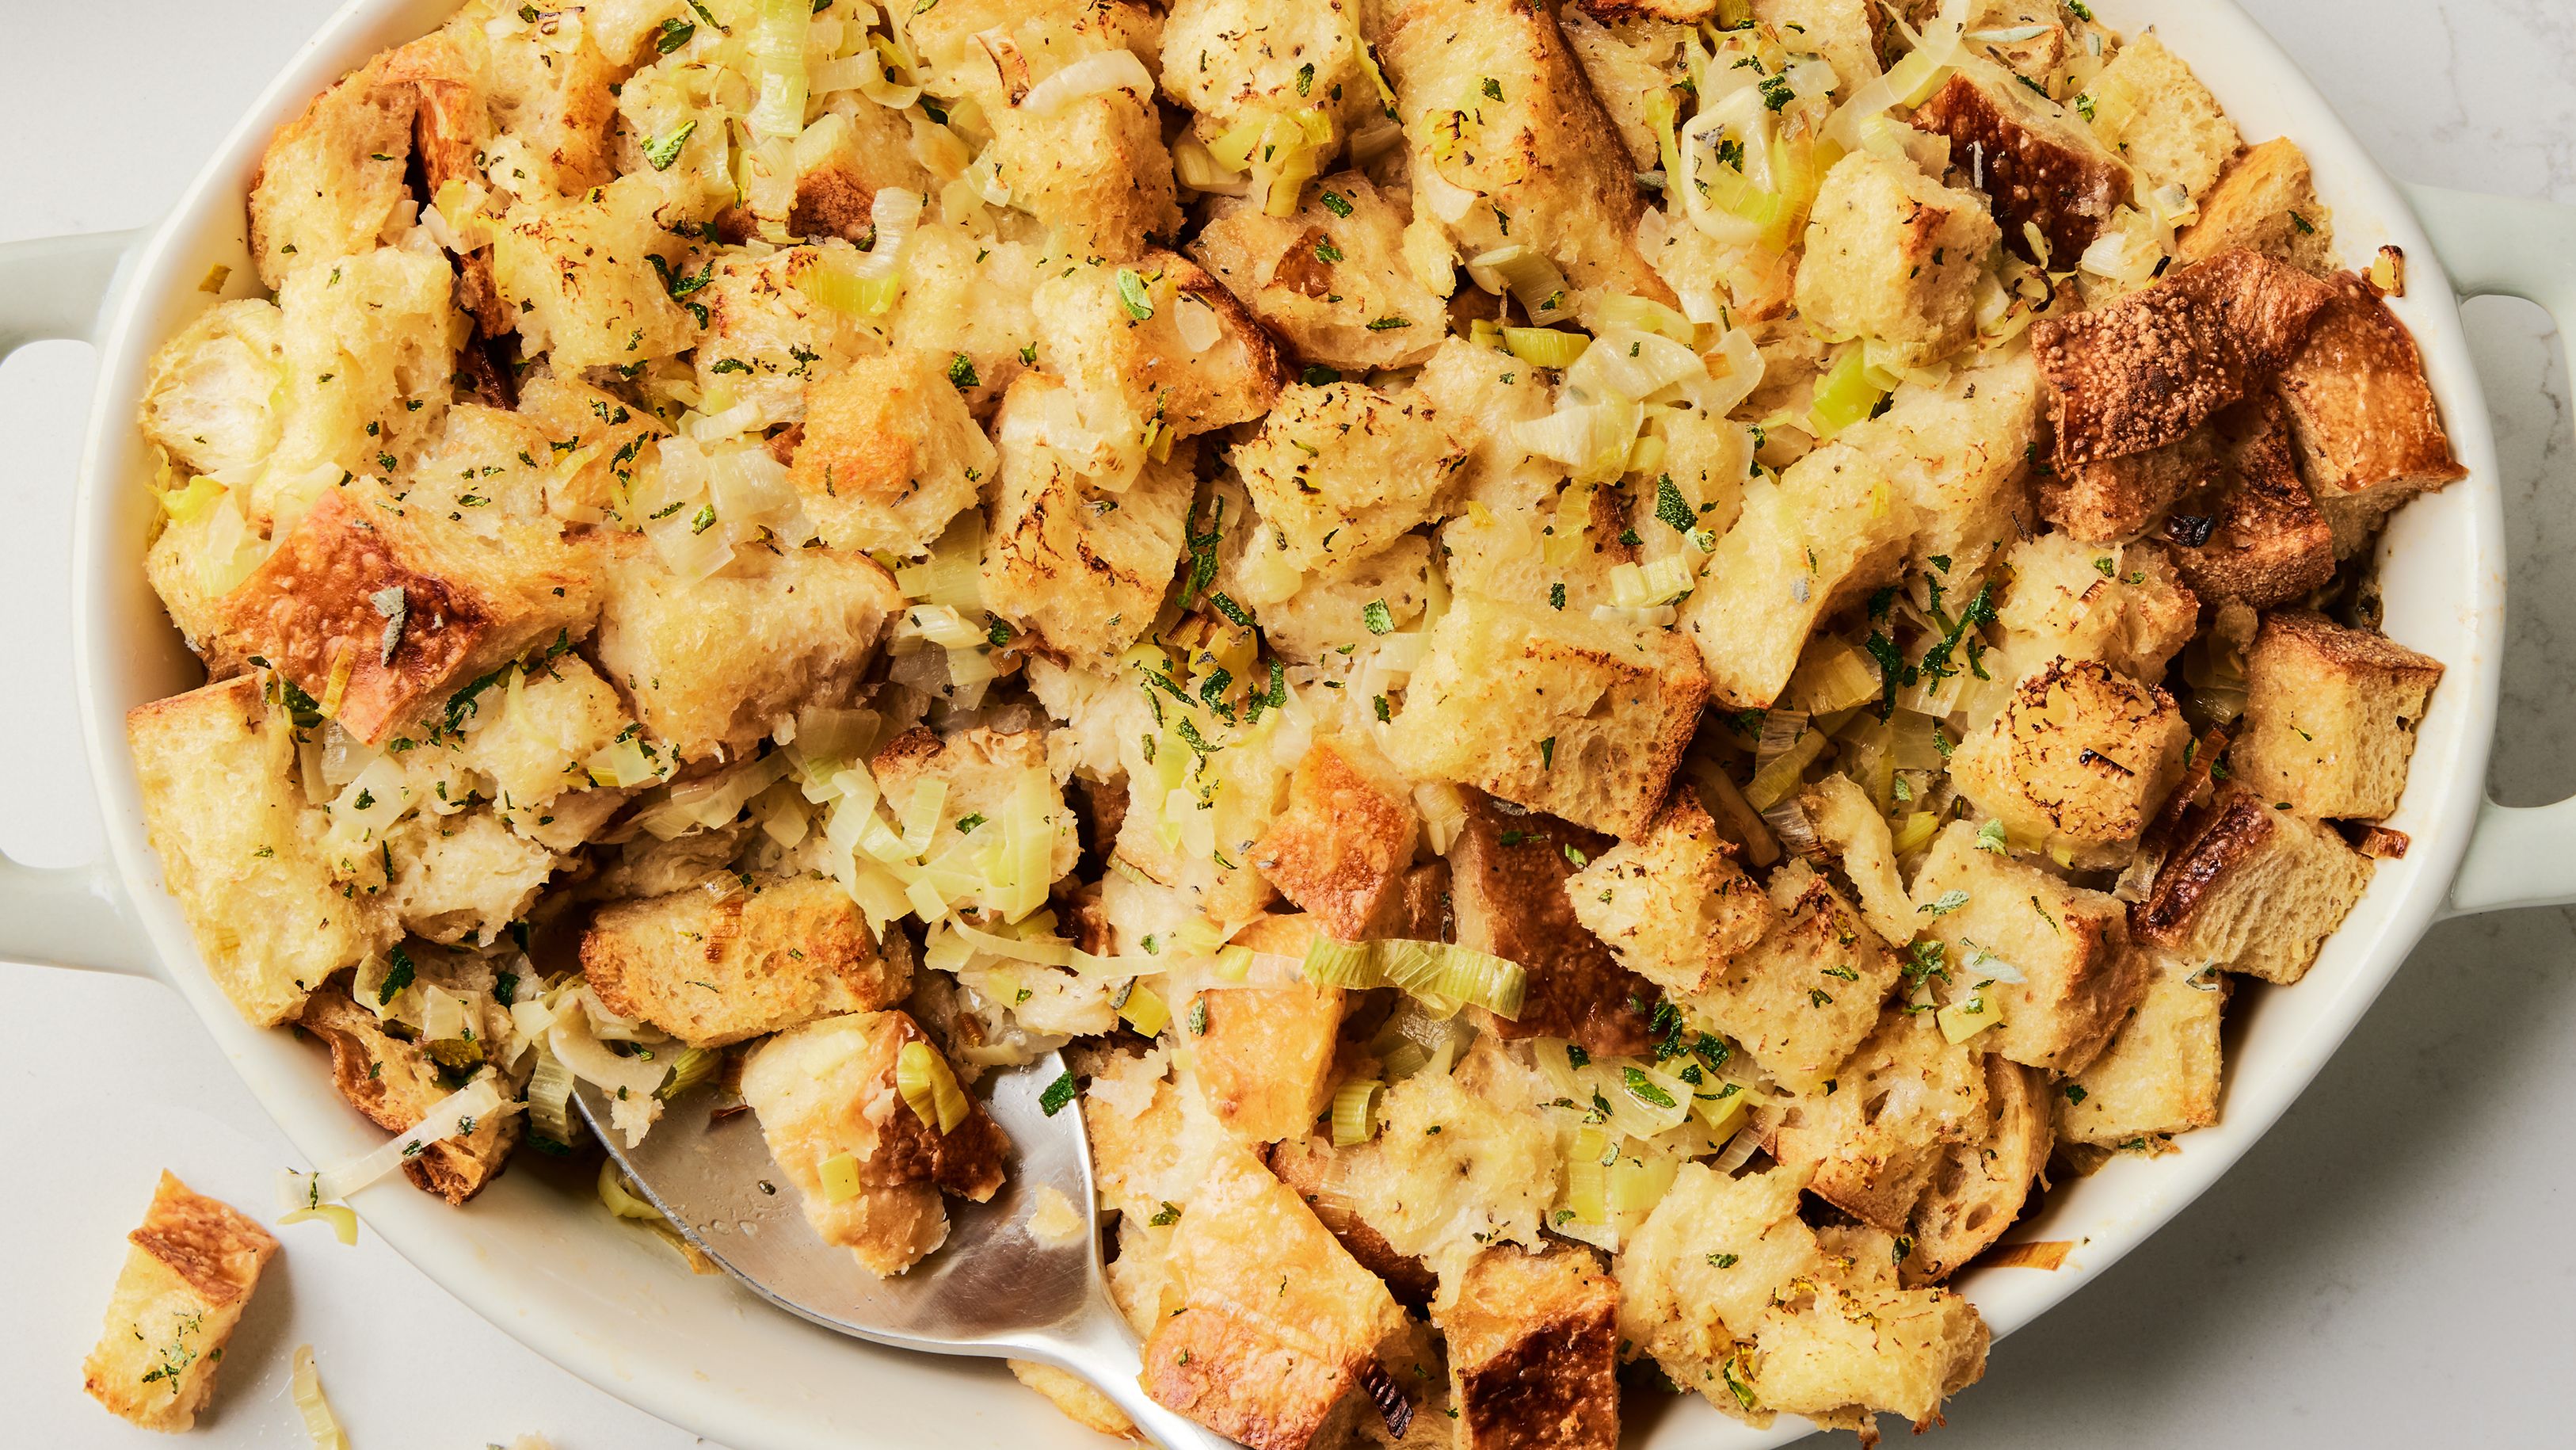 Best Stuffing Recipe - How To Make Homemade Stuffing